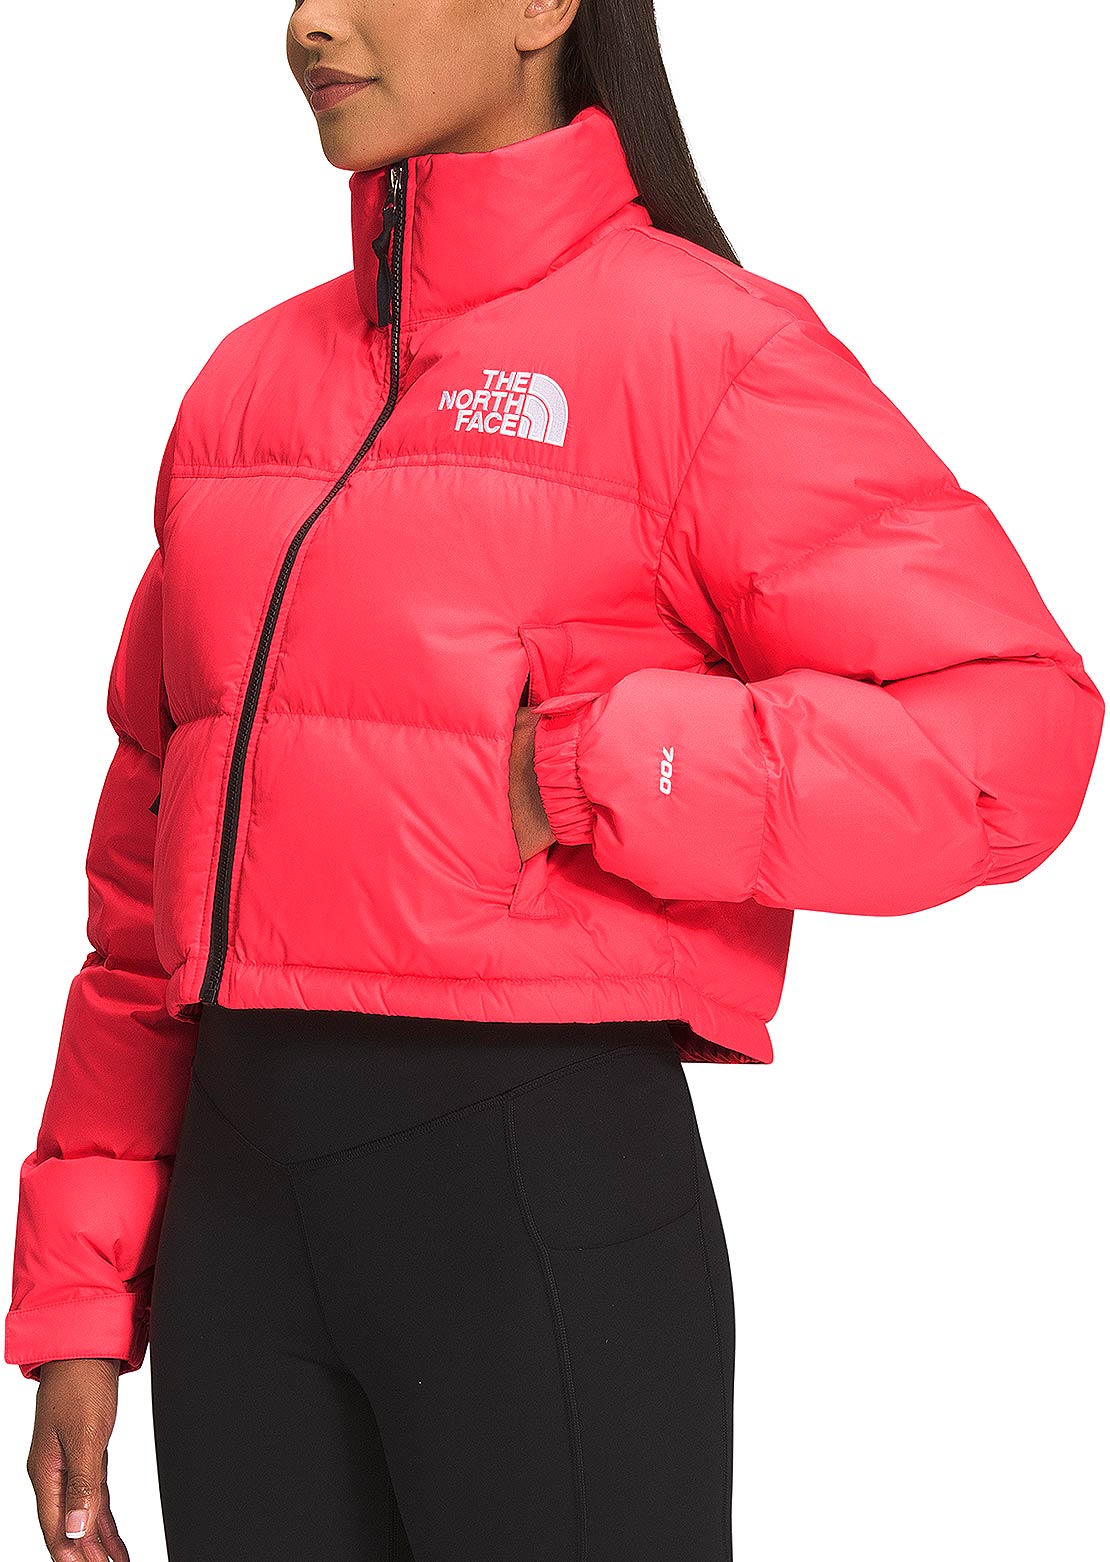 North Face Women's Jacket PRFO Sports